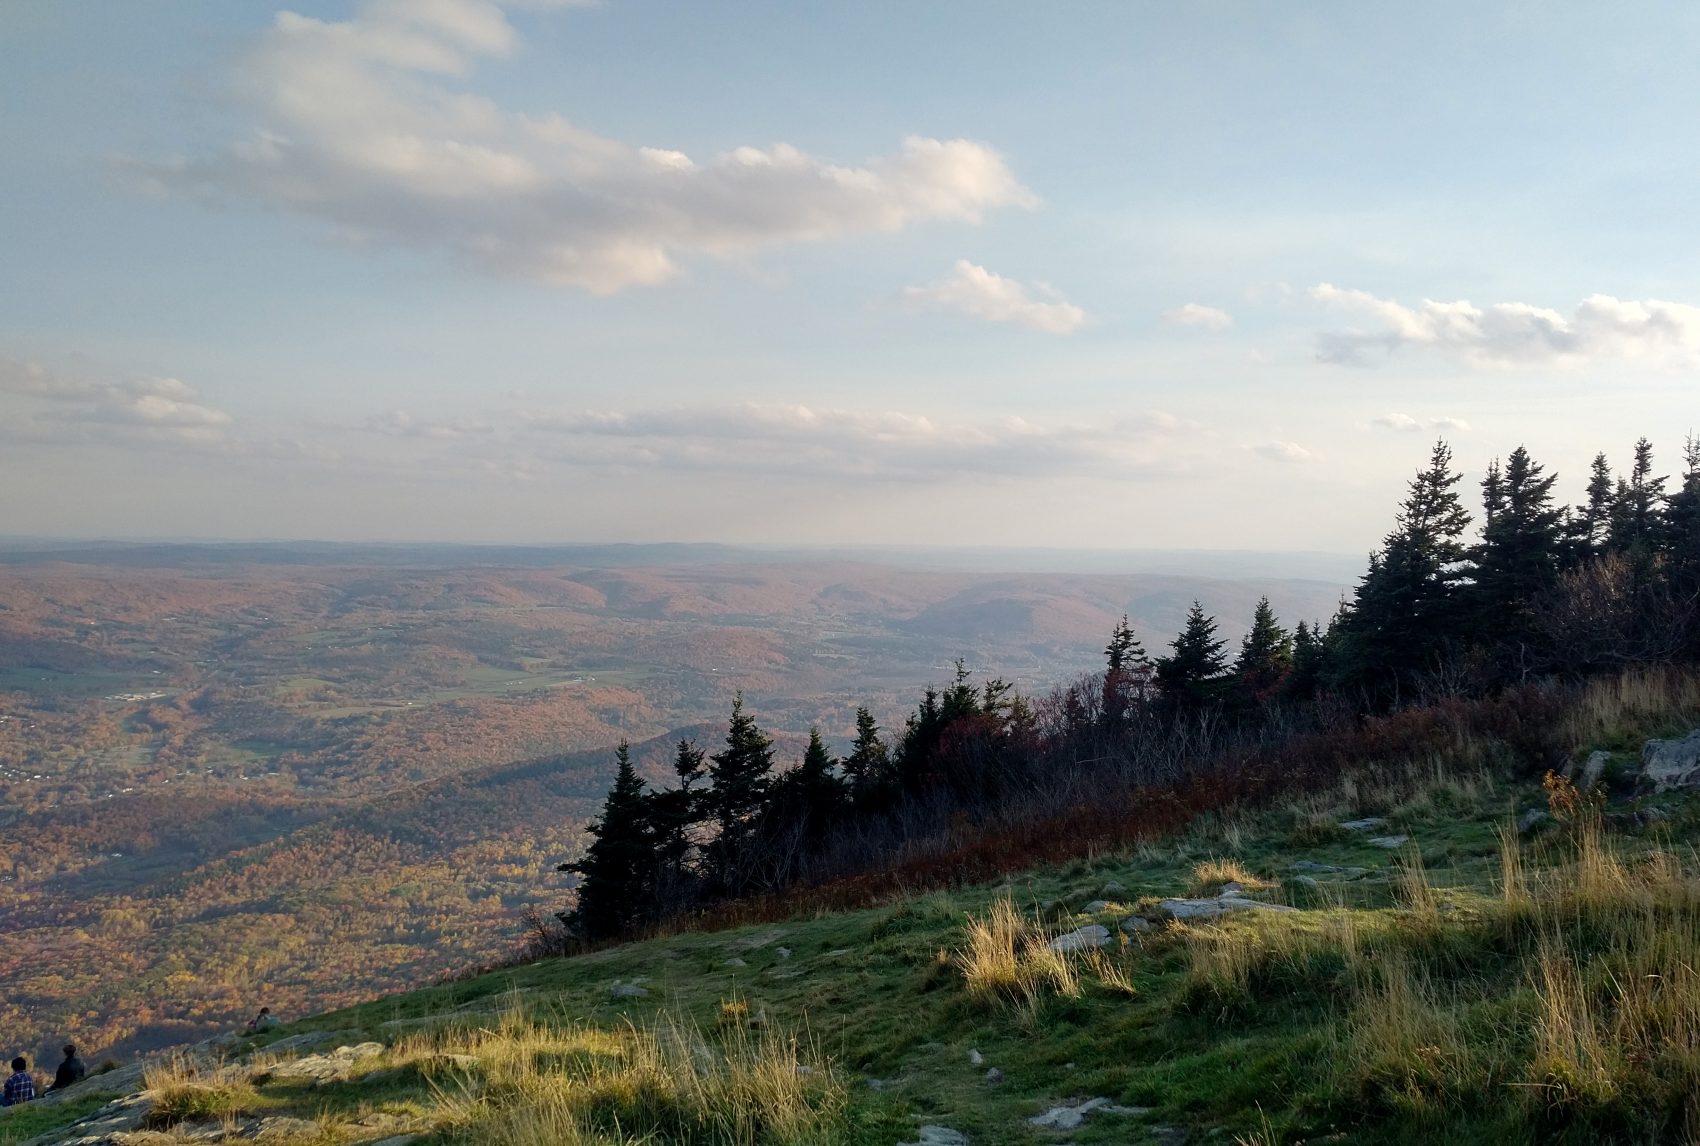 The view from Mount Greylock looking east into the town of Adams. (Bob Shaffer/WBUR)